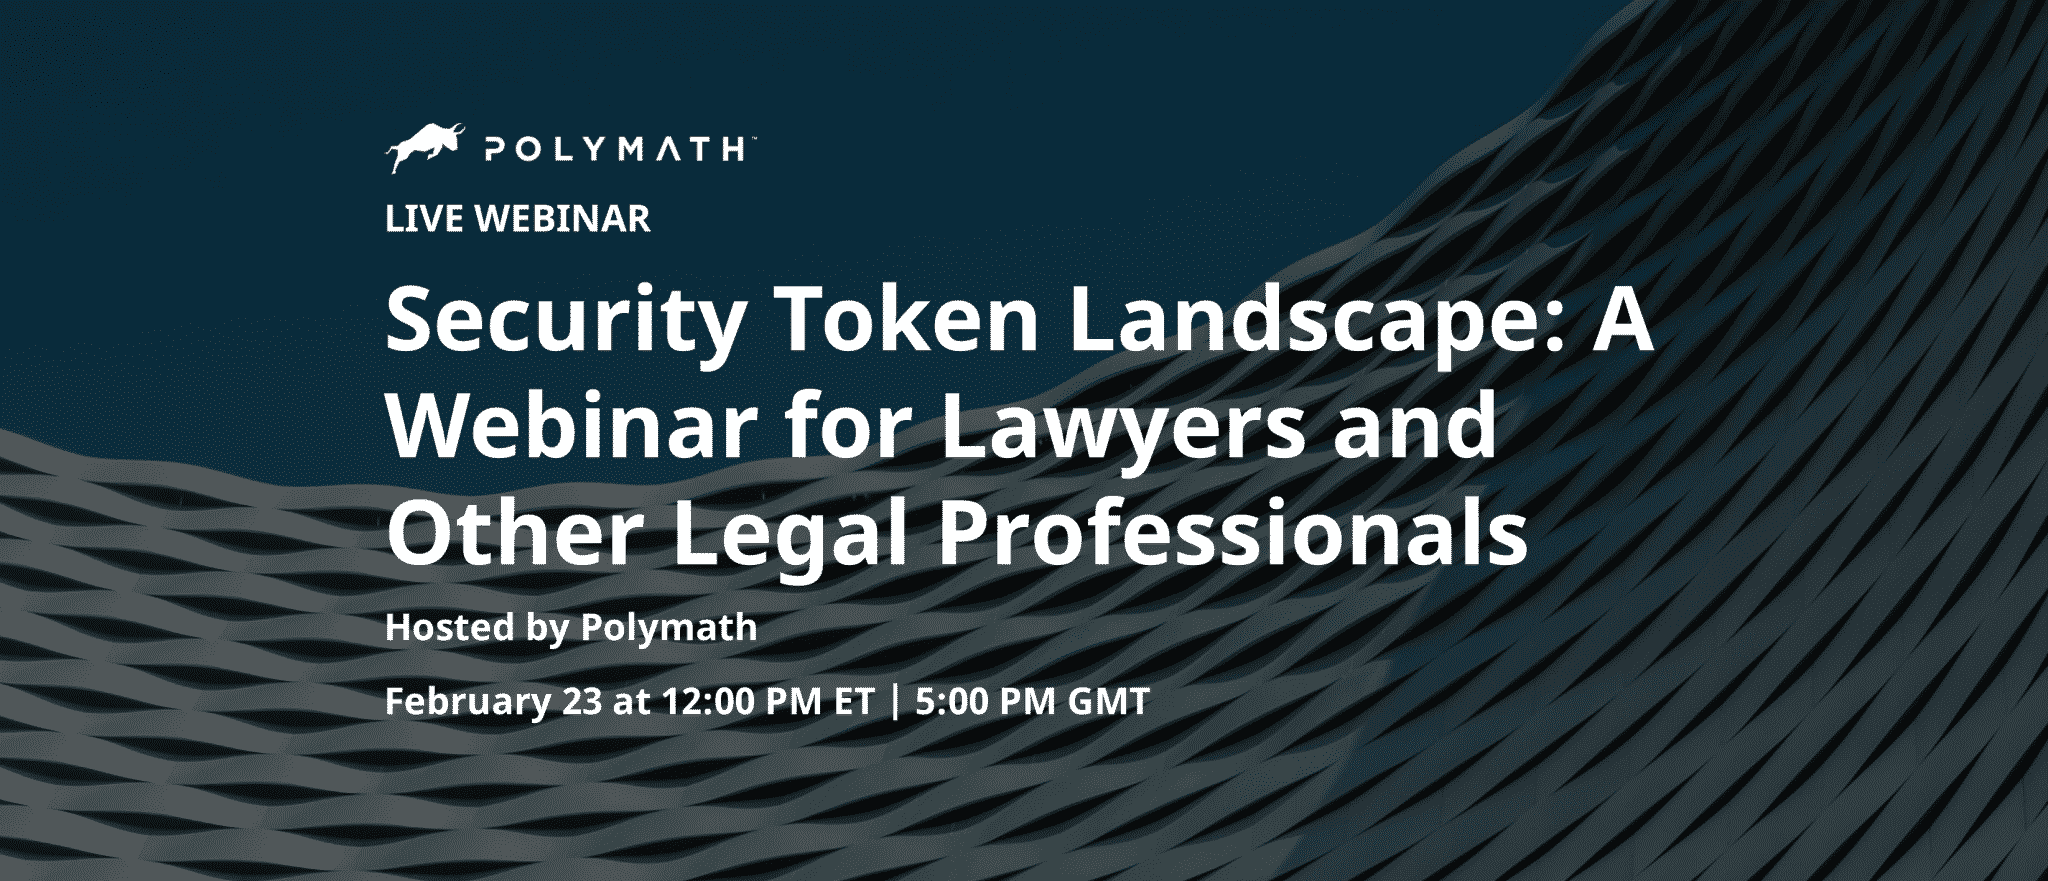 Polymath - Security Token Landscape: A Webinar for Lawyers and Other Legal Professionals